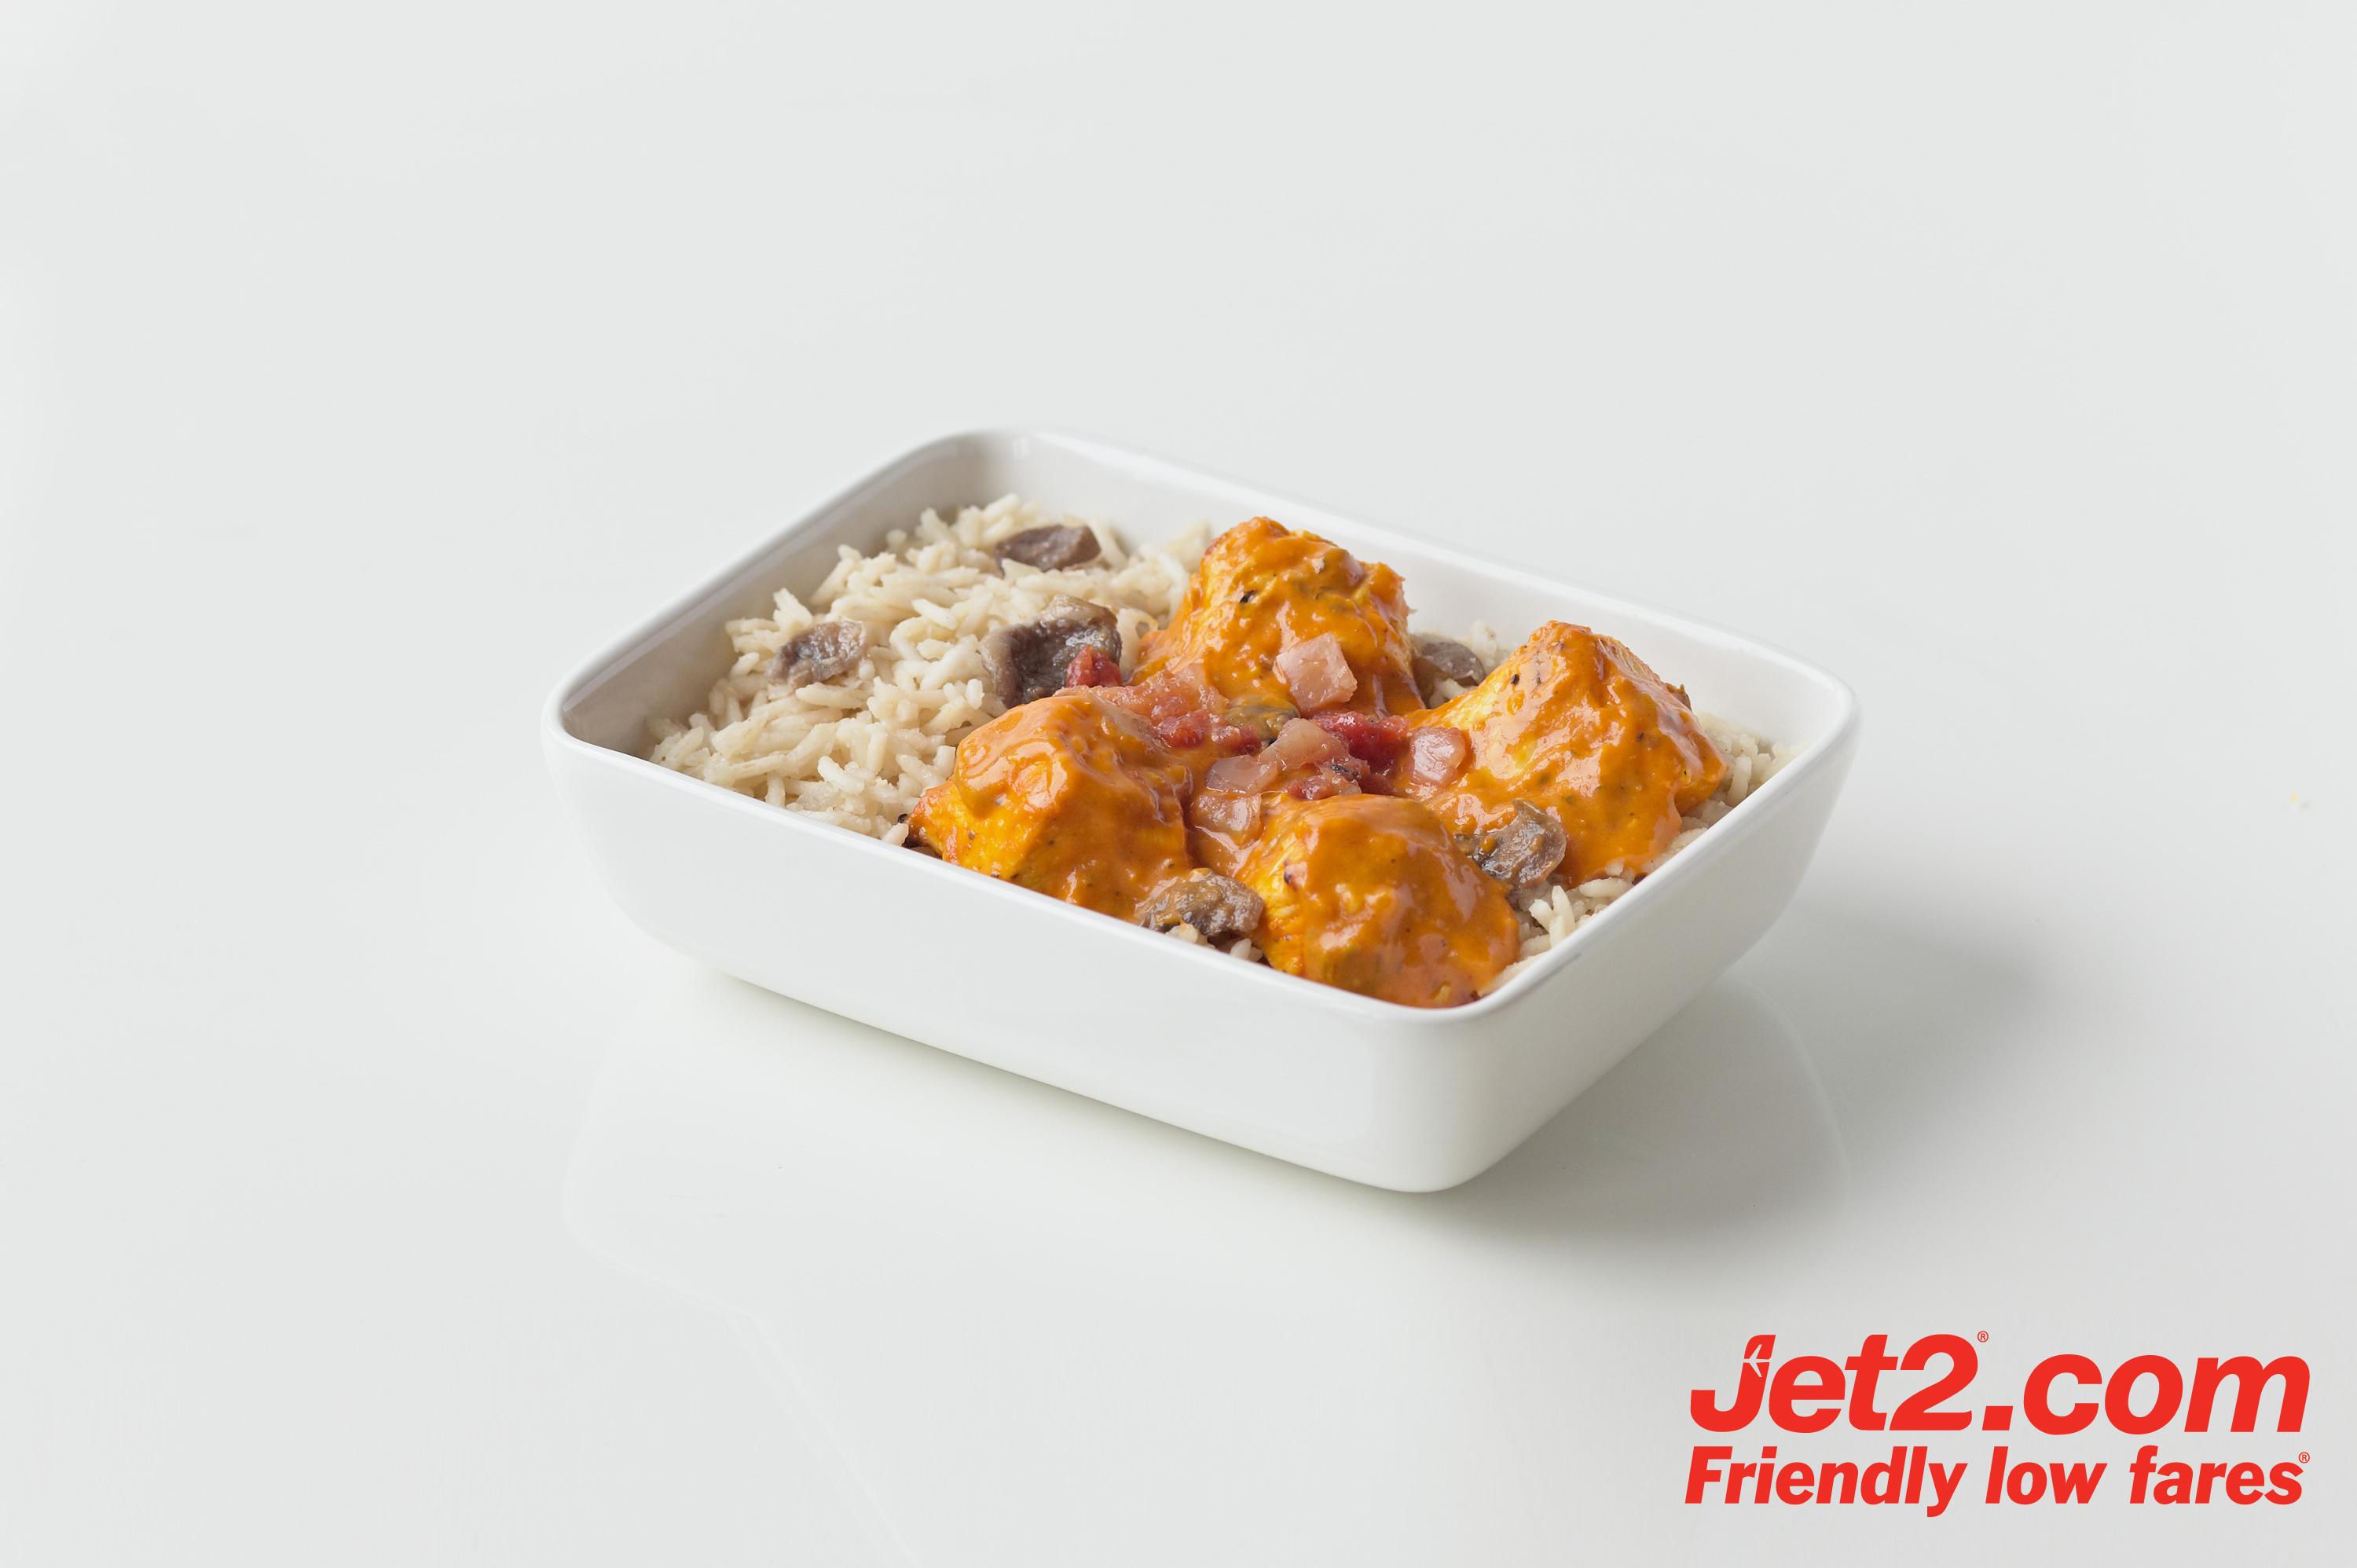 Jet2.com Launches New In-Flight Meal From Budapest